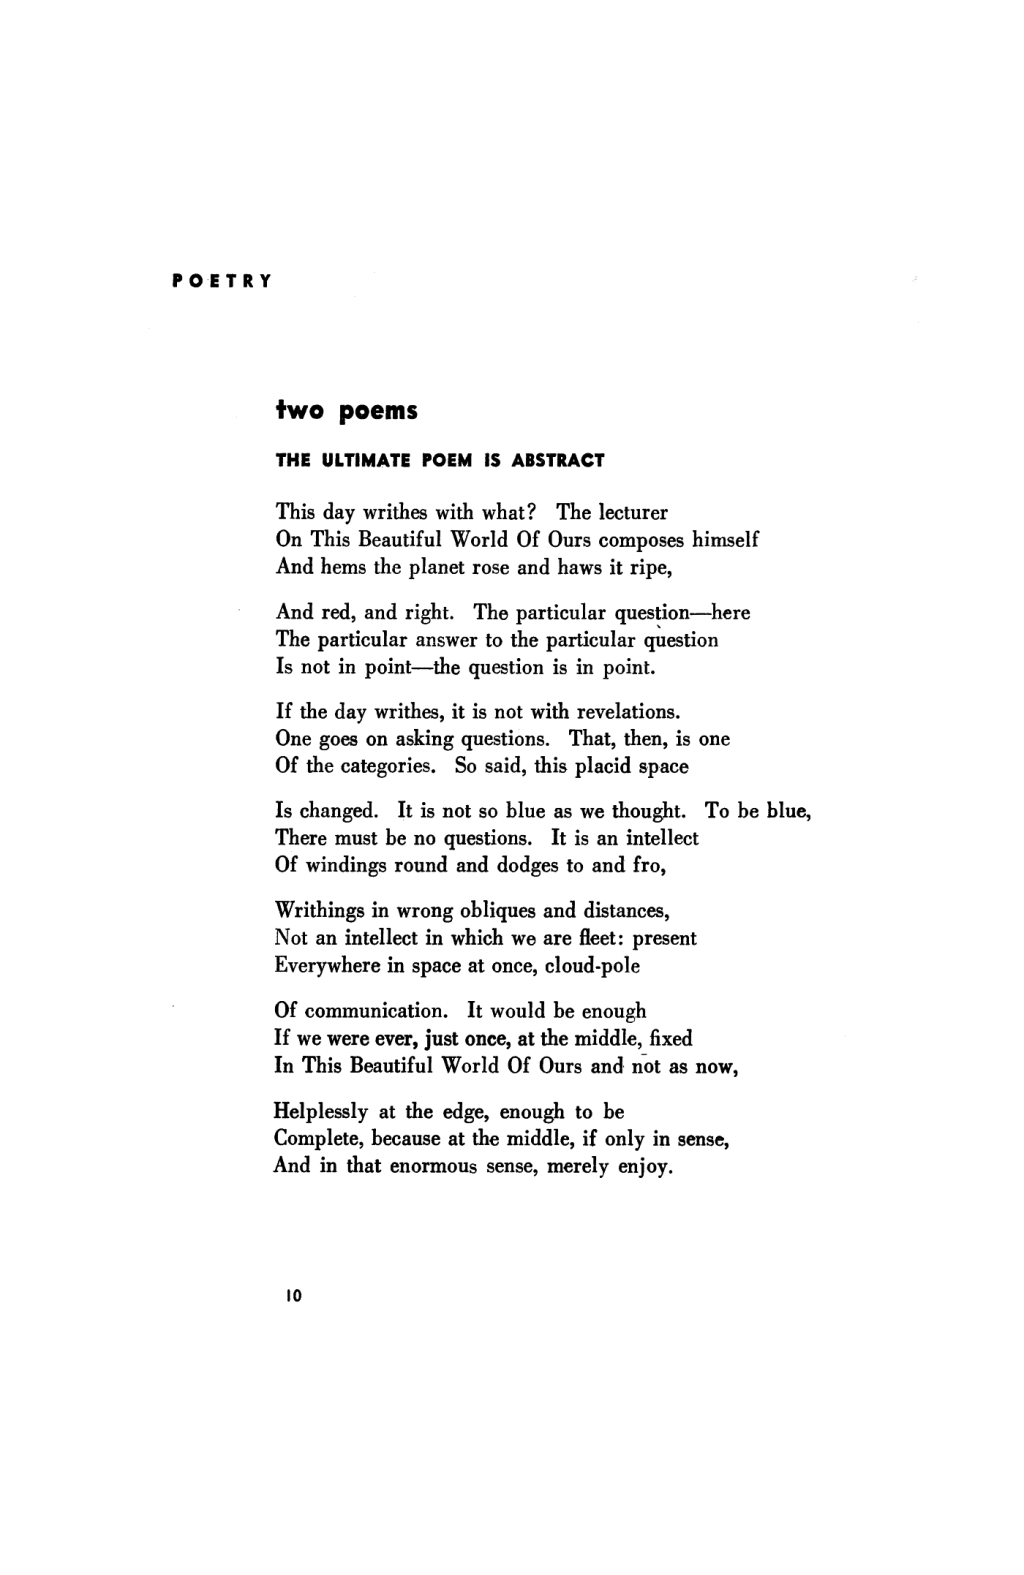 Picture of: The Ultimate Poem Is Abstract by Wallace Stevens  Poetry Magazine